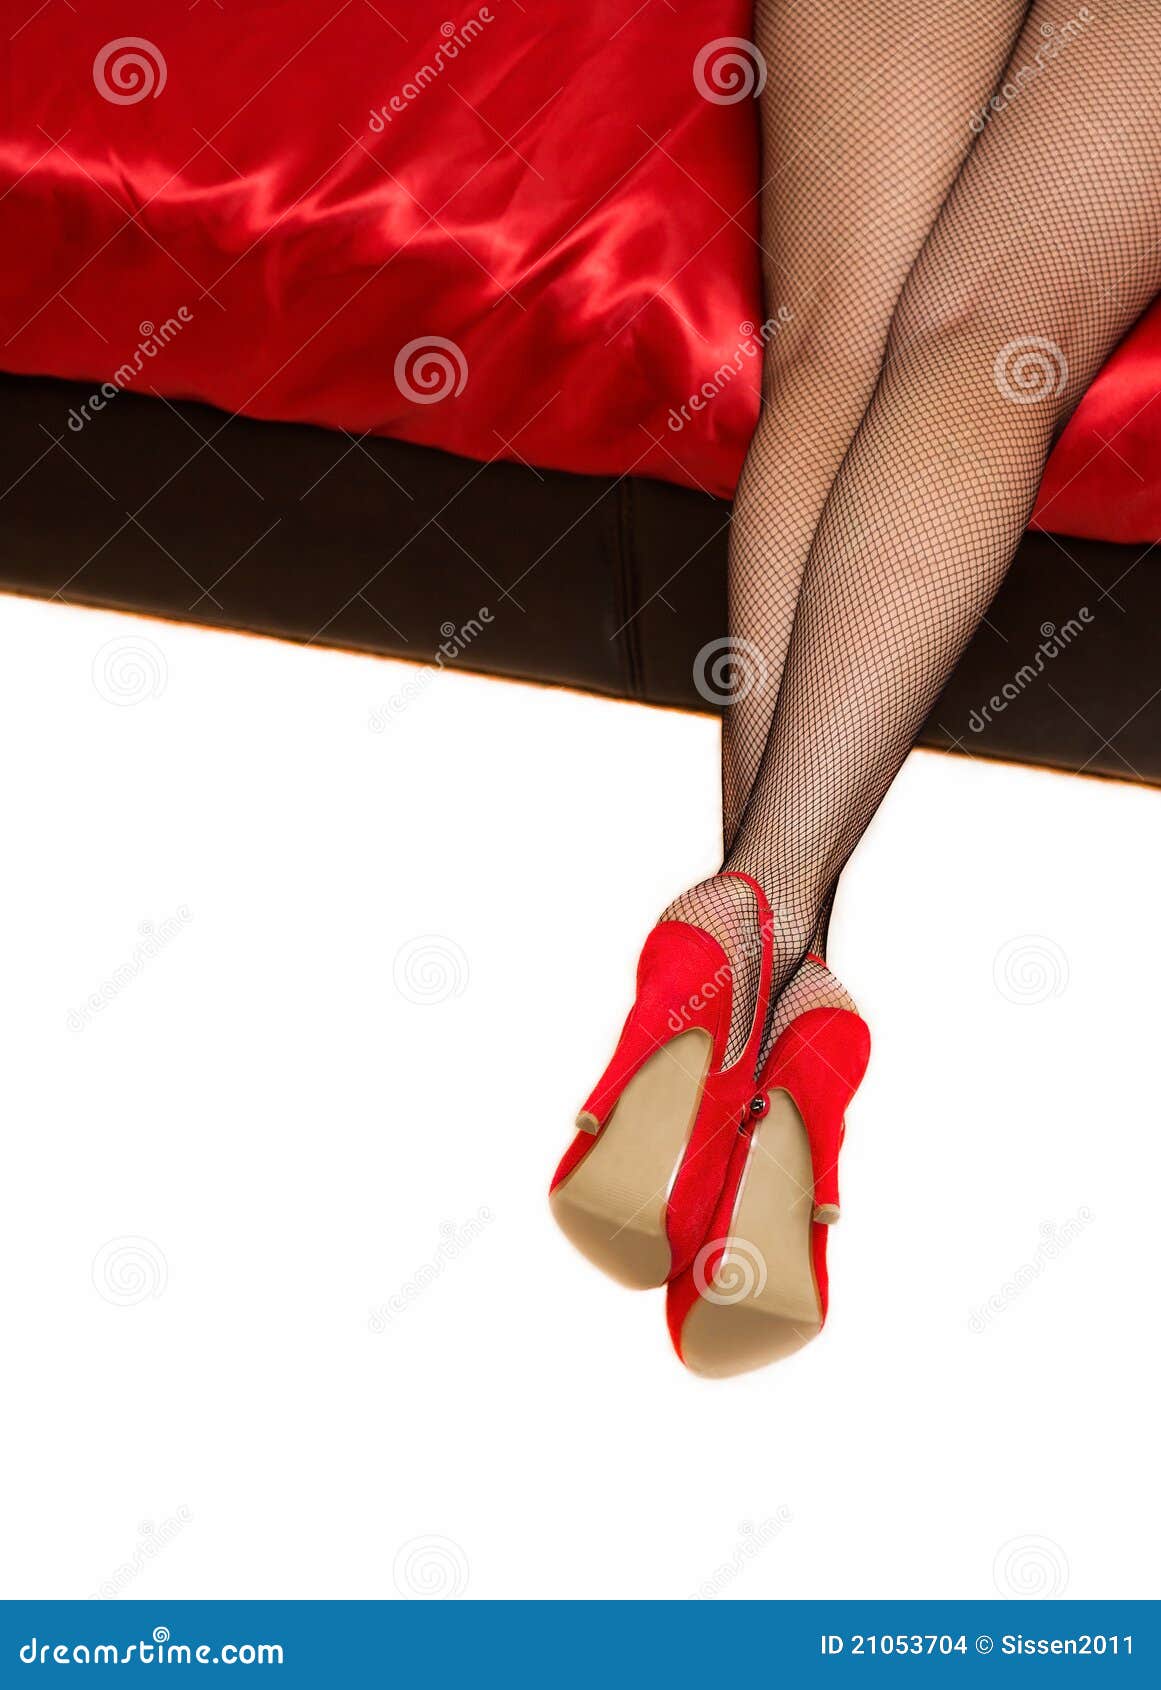 Female Legs With Red Shoes On A White Background Stock